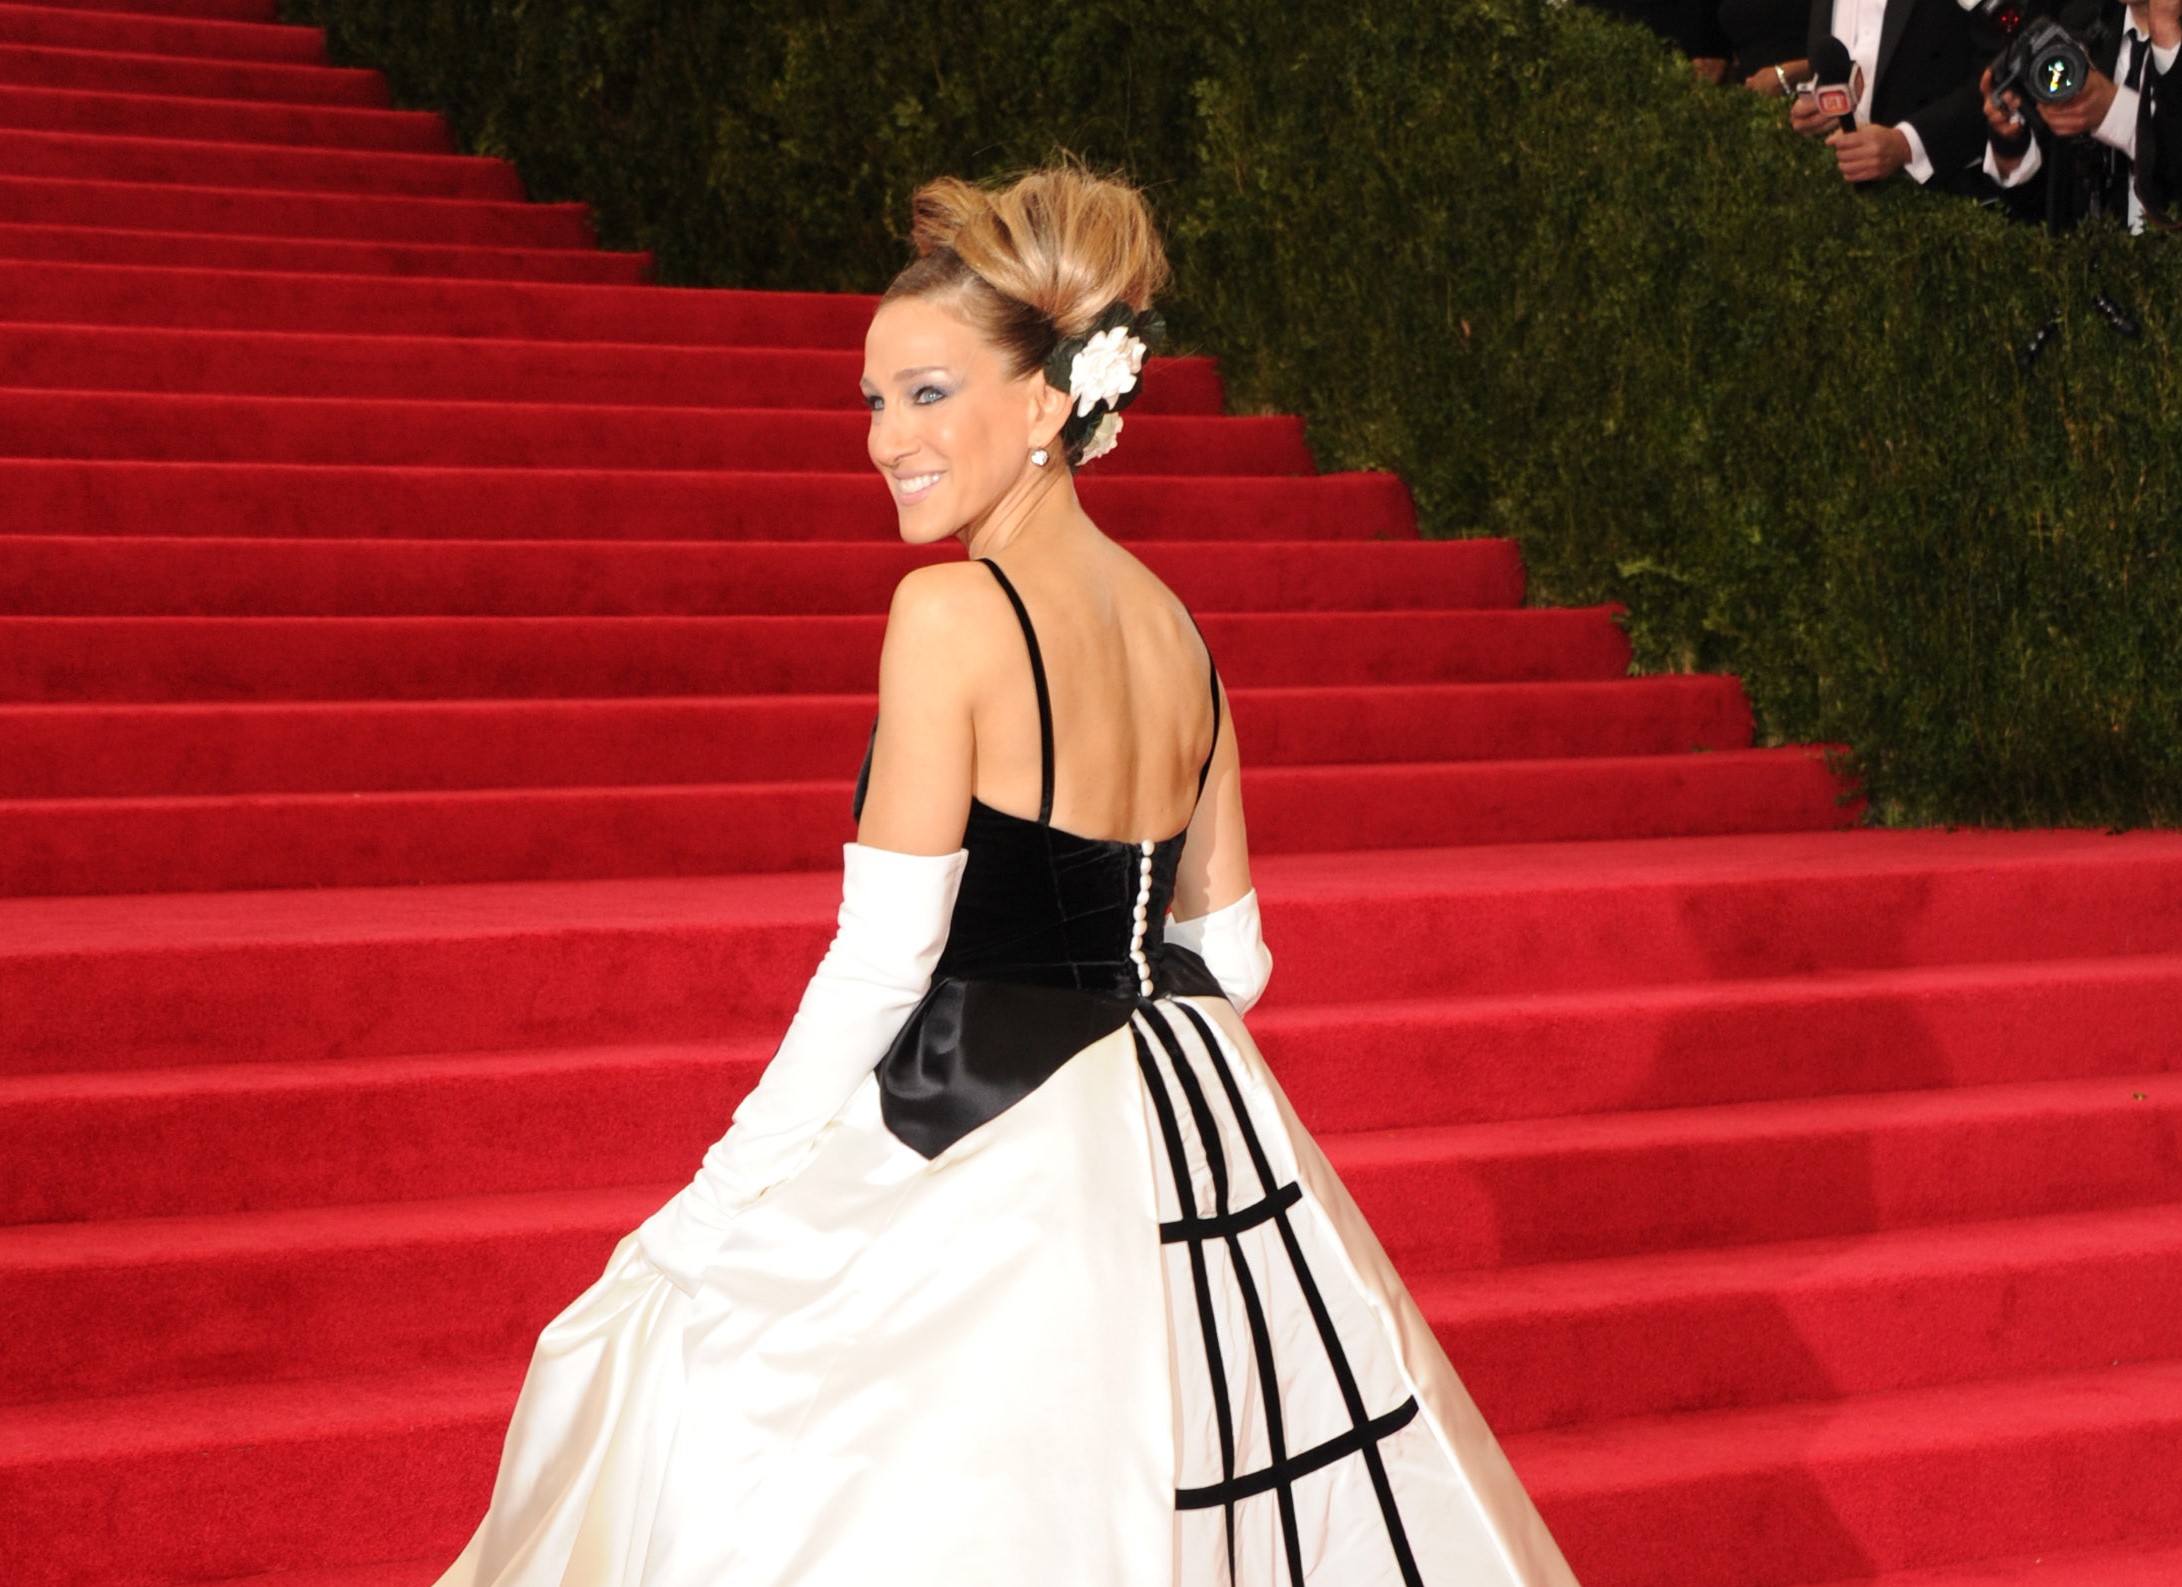 Sarah Jessica Parker wears a black and white gown with white gloves on the Met Gala steps.